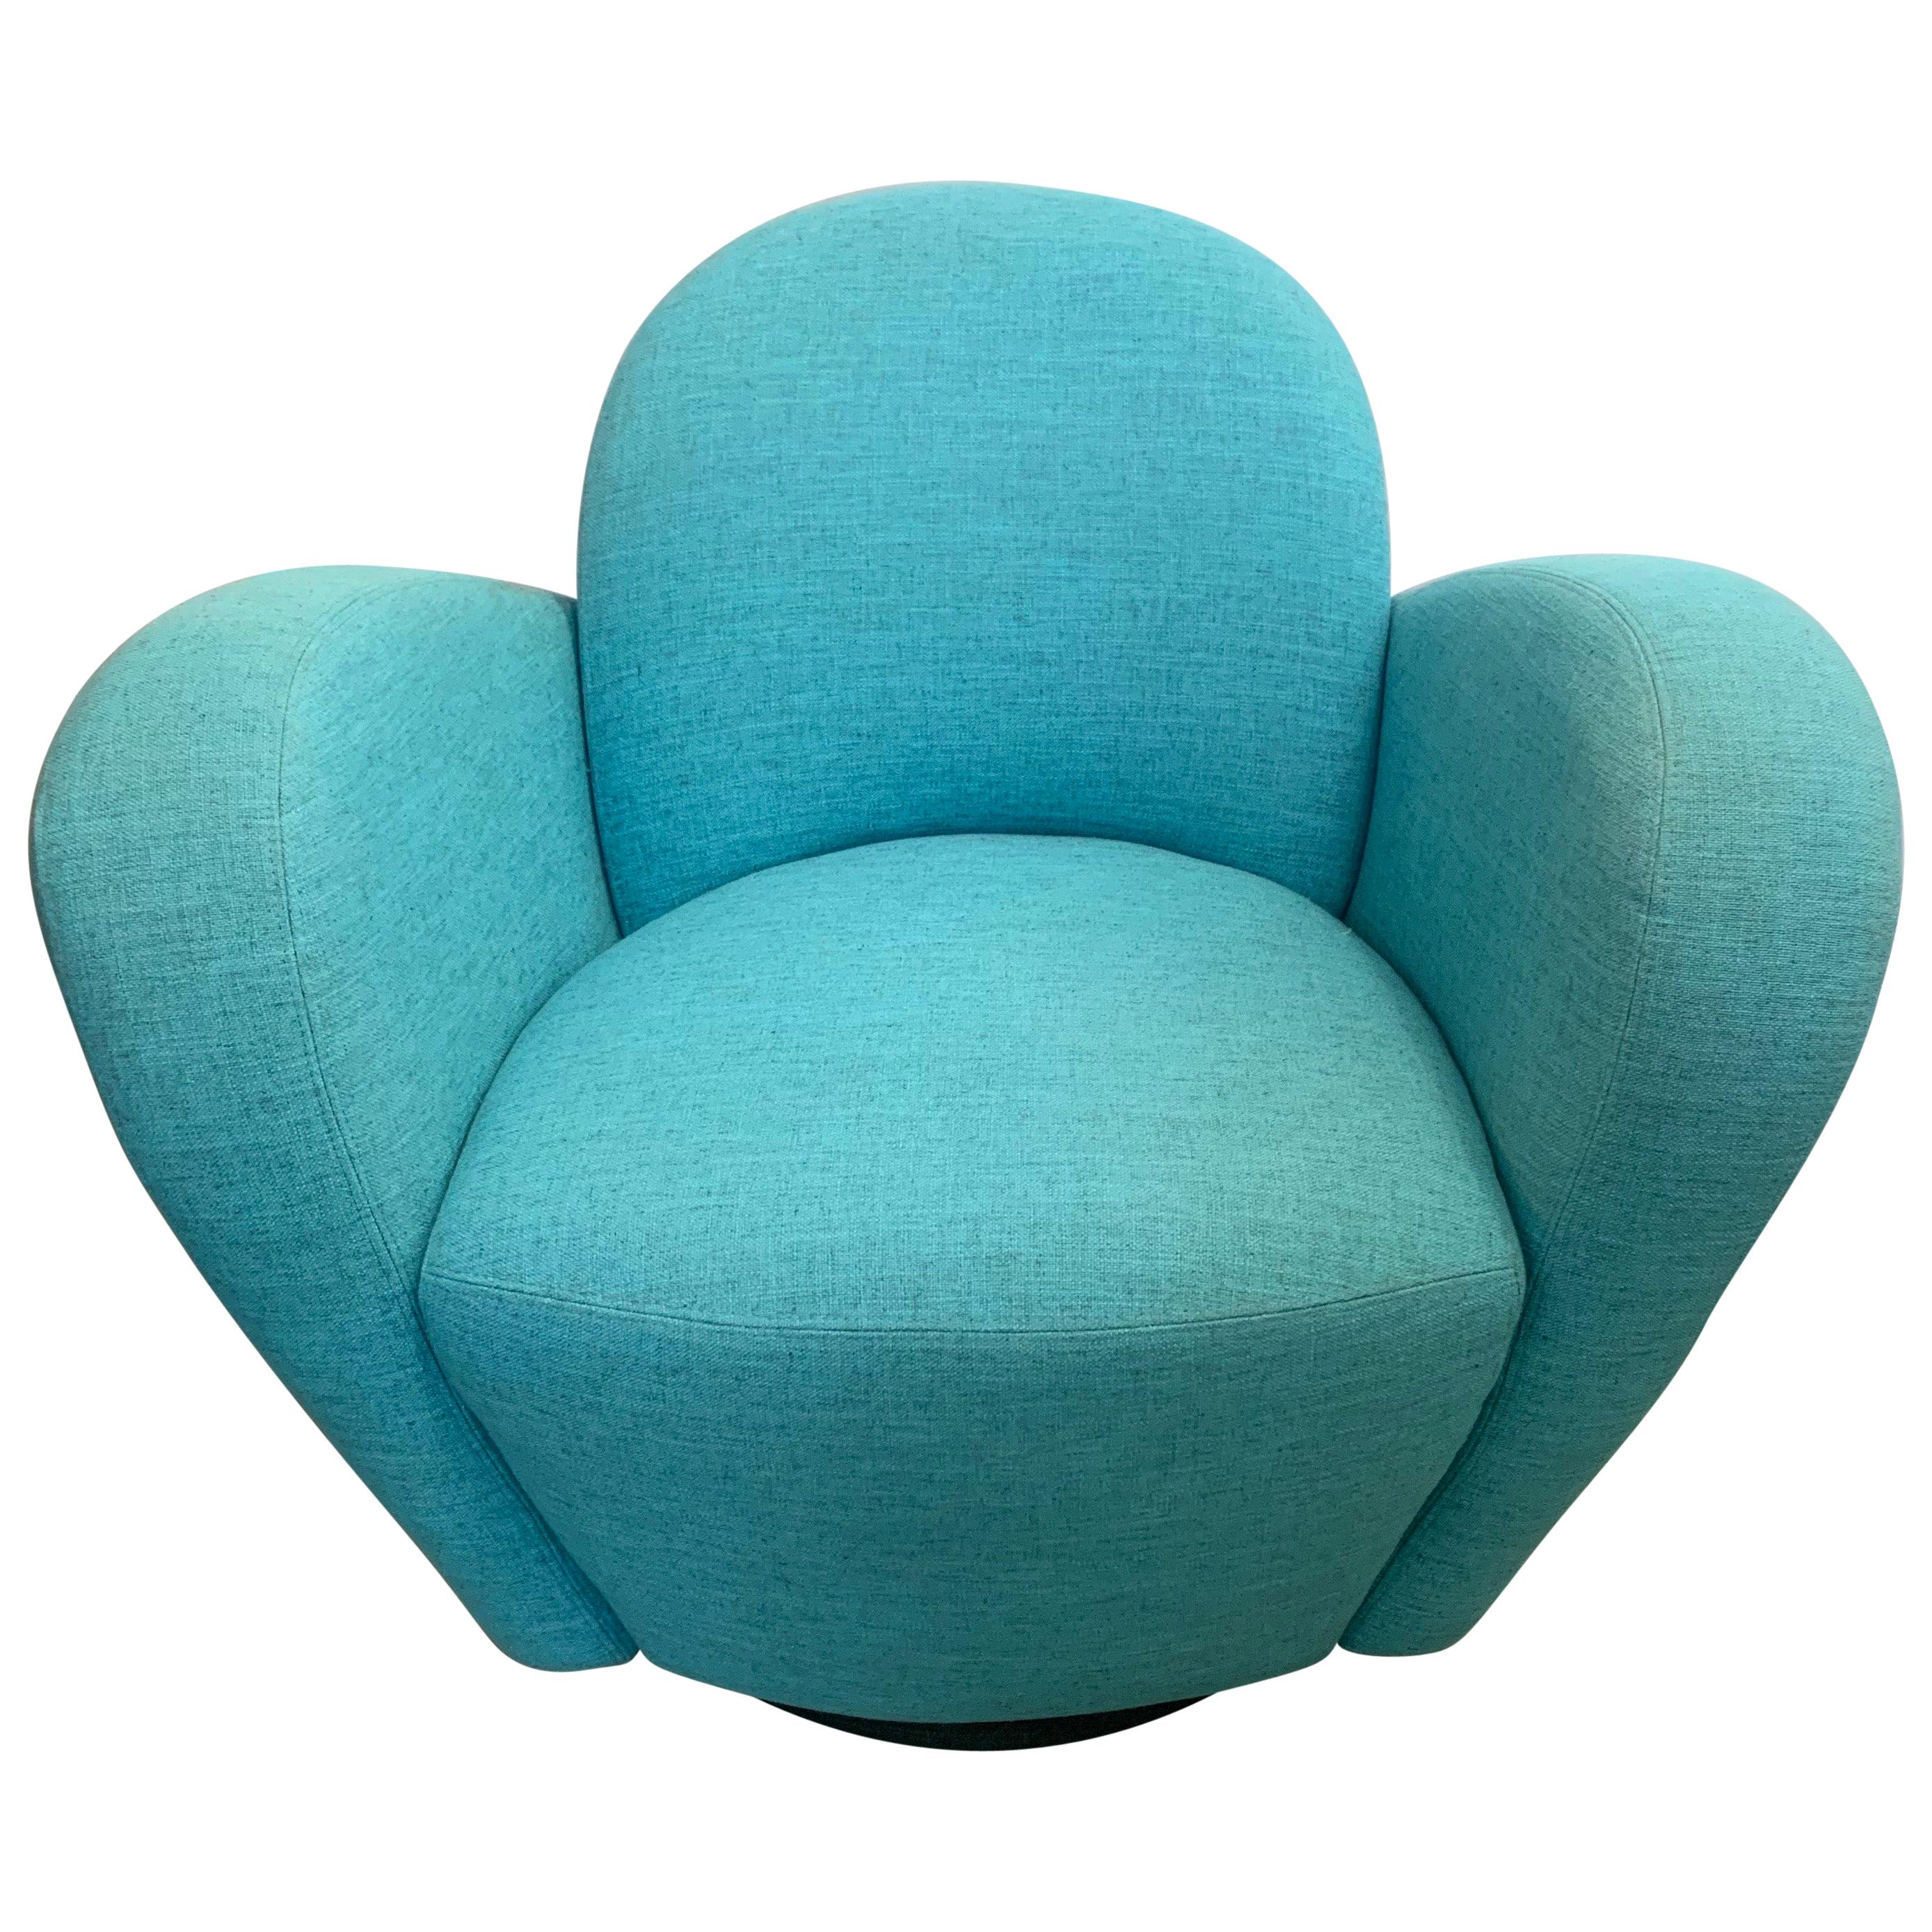 Mid-Century Modern Turquoise Upholstered Swivel Chair Weiman